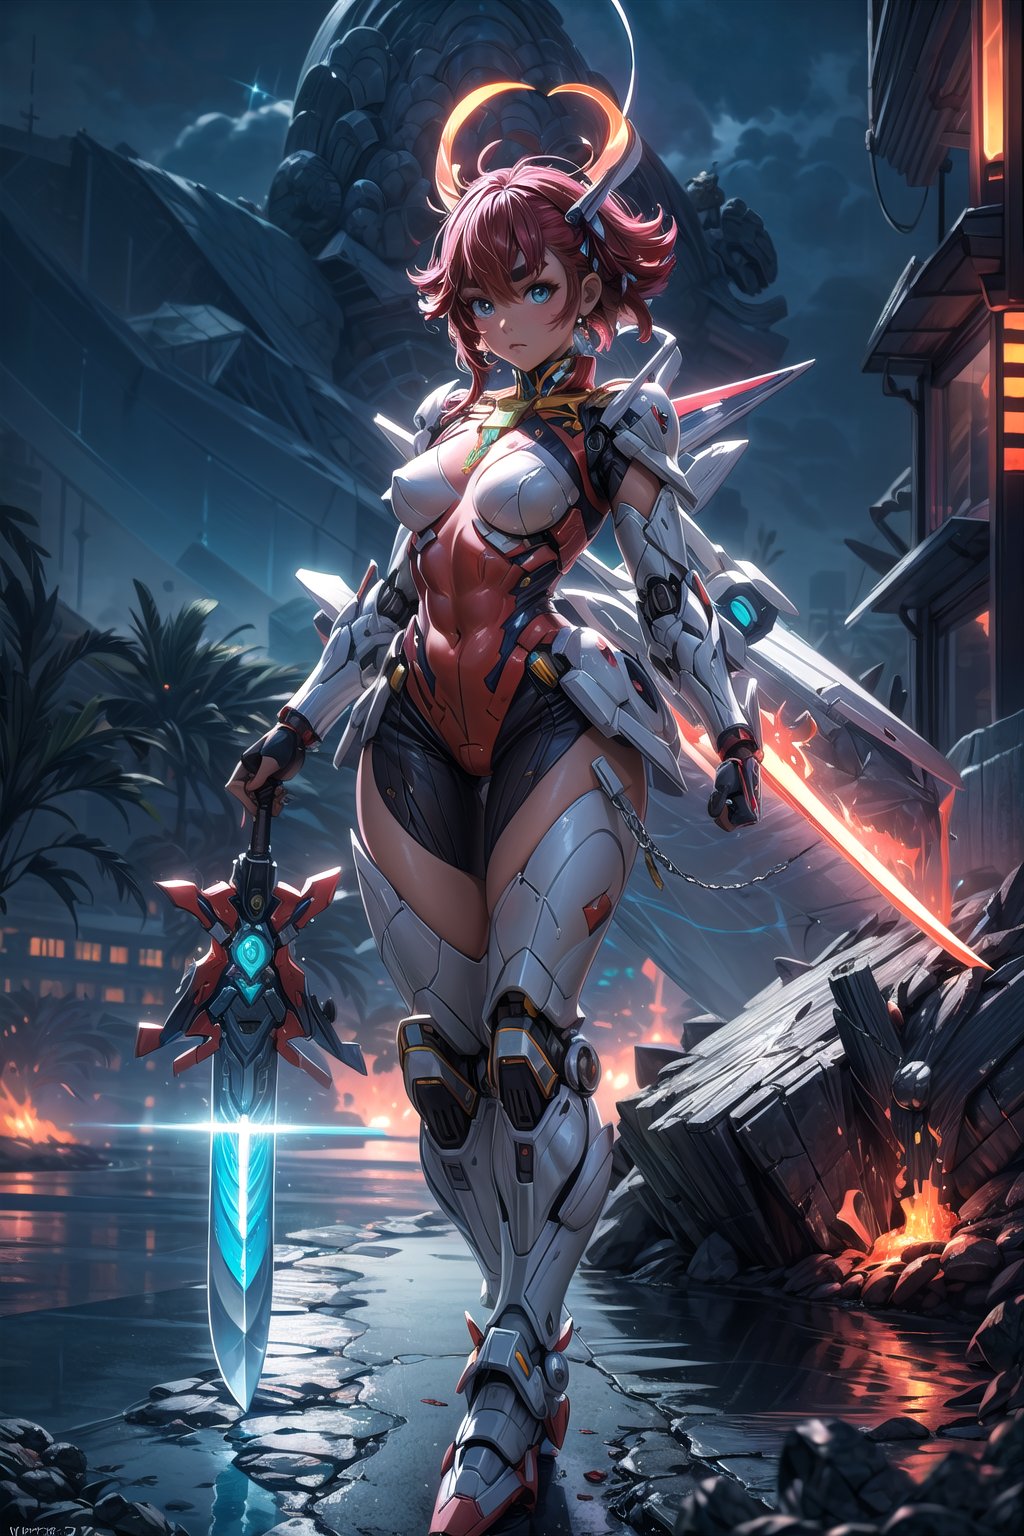 ((Masterpiece, best quality, ultra details, 8k, HDR)), Lenkaizm,(absurdity), Envision a warrior with lightning hair, (holding weapon:1.8), wearing an ethereal battle armor glowing with intense sparkling light, heroic muscular, mechanical leg, robotics neon rivets, light reflection, super artsy, algorithmic artful, arching light, goddess, divine, outerwold, super detail, exquisite details,ultralman style, tokusatsu theme, sharp focus, battle scene, vivid color, light beam, saint seiya, berserk, btx, cosmos, starry sky, moon, legendary, ultimate form,  jet thruster, wing cannon, jet leg,  neon rivets armaments, big saggy breast,((Birds view.)) Masterpiece, best quality, Ultra-high resolution, Realistic, sense of reality, The ultimate detail, 8K wallpaper, Professional lighting, Cyberpunk lights. Flame around armor.The perfect hand, Realistic hands, 1girl, solo, standing, full body, jixieji, Wearing a mecha, mechanical joint, dynamic posture, Universe, Earth, machinery, Heela collections, Mecha girl sexaroid, Chain link fence, ((dynamic pose)), blue_jijiaS, fbot, mecha, Pink Mecha, Mecha girl figure, Honey Mecha, Mecha warrior, Mecha, CYBER PUNK, Gundam, rx78, girl, detail, GTS, Real, 1GIRL, science fiction, Mechagirl, Girl. Giantess standing on the city. She is 200 meters higher than the building., bird 's-eye view, fantastic atmosphere, river. Hold a plane in the hands. Small trucks and human beings around the Giantess., river, fantastic sense of light. Holding a larger laser gun, fight with monsters., greendesign, Hourglass body shape, orange, Sagittariusarmor, mechaarmor, jellyfish,thick thigh:1.2,big saggy breast:1.2,abs:1.2
